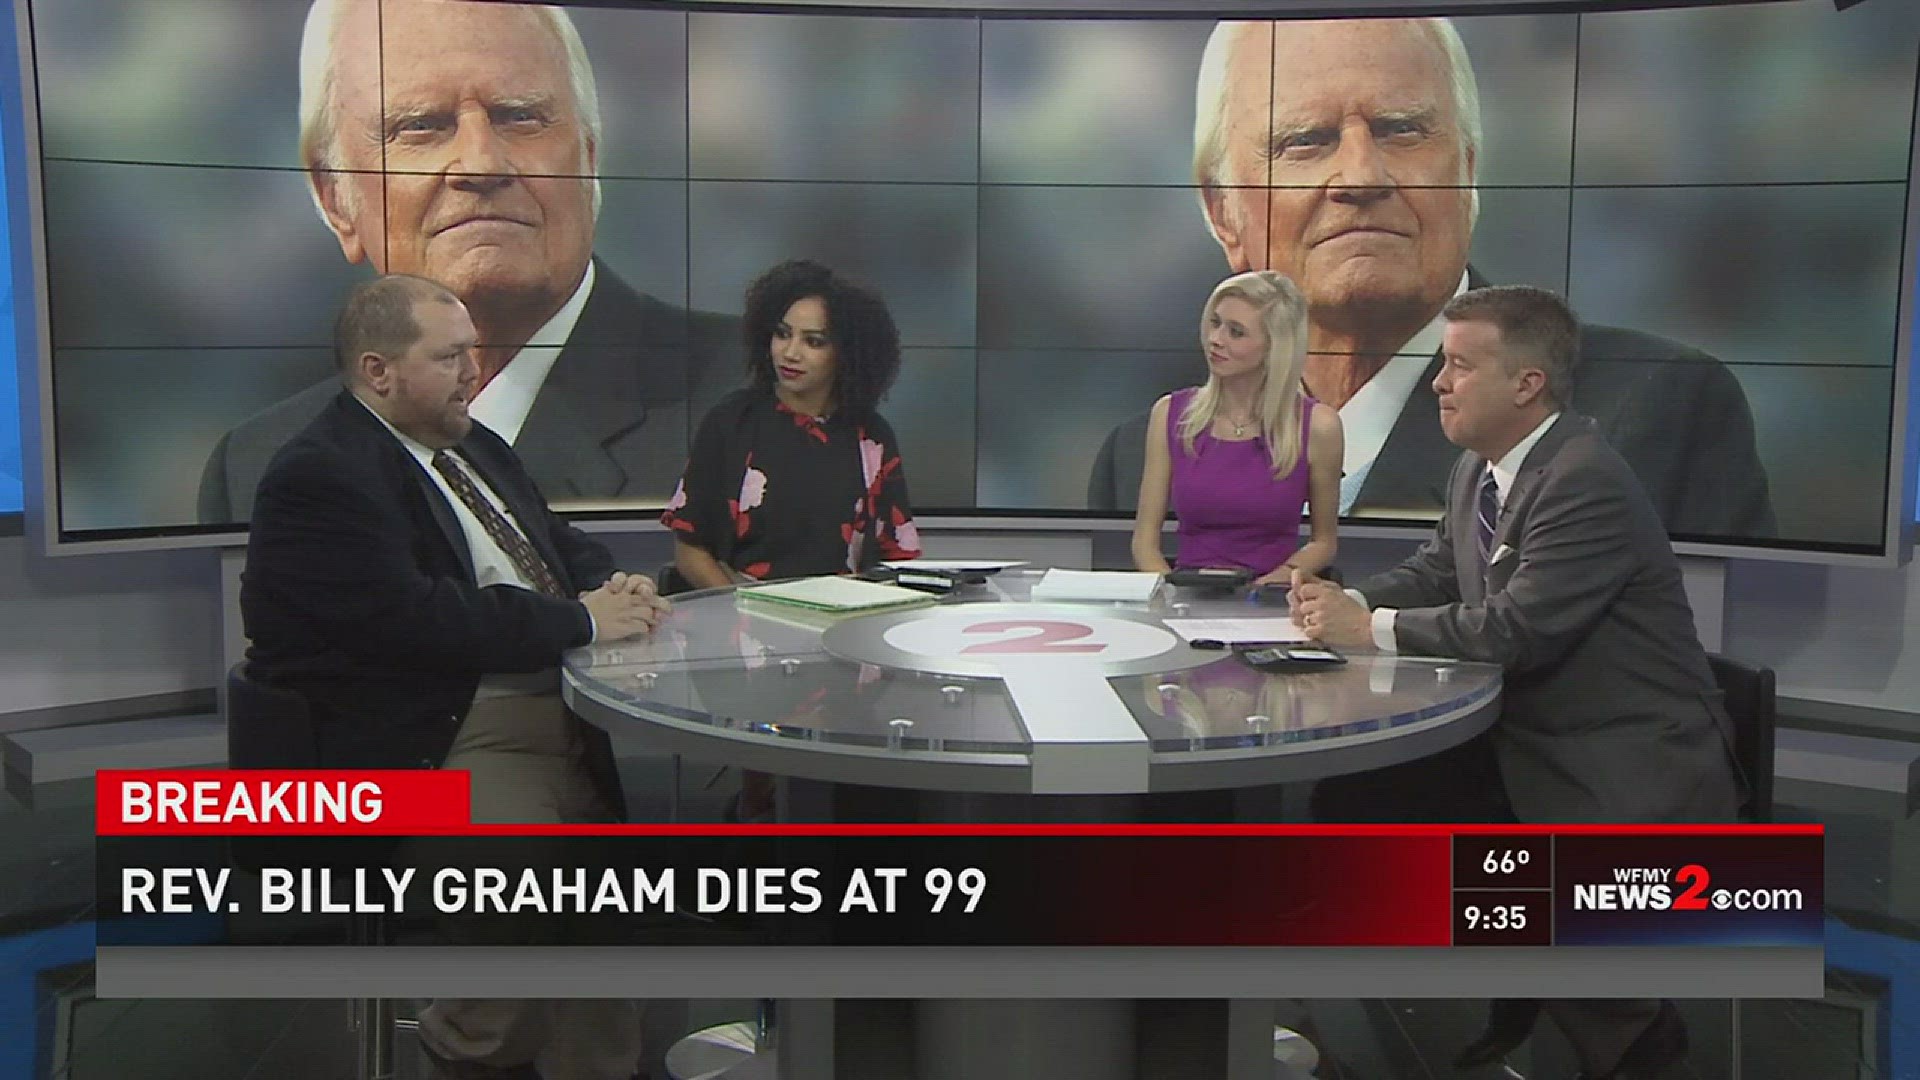 Bill Coble Pastor at Greensboro Church Of God talks about Billy Graham who was a 'general of faith.'